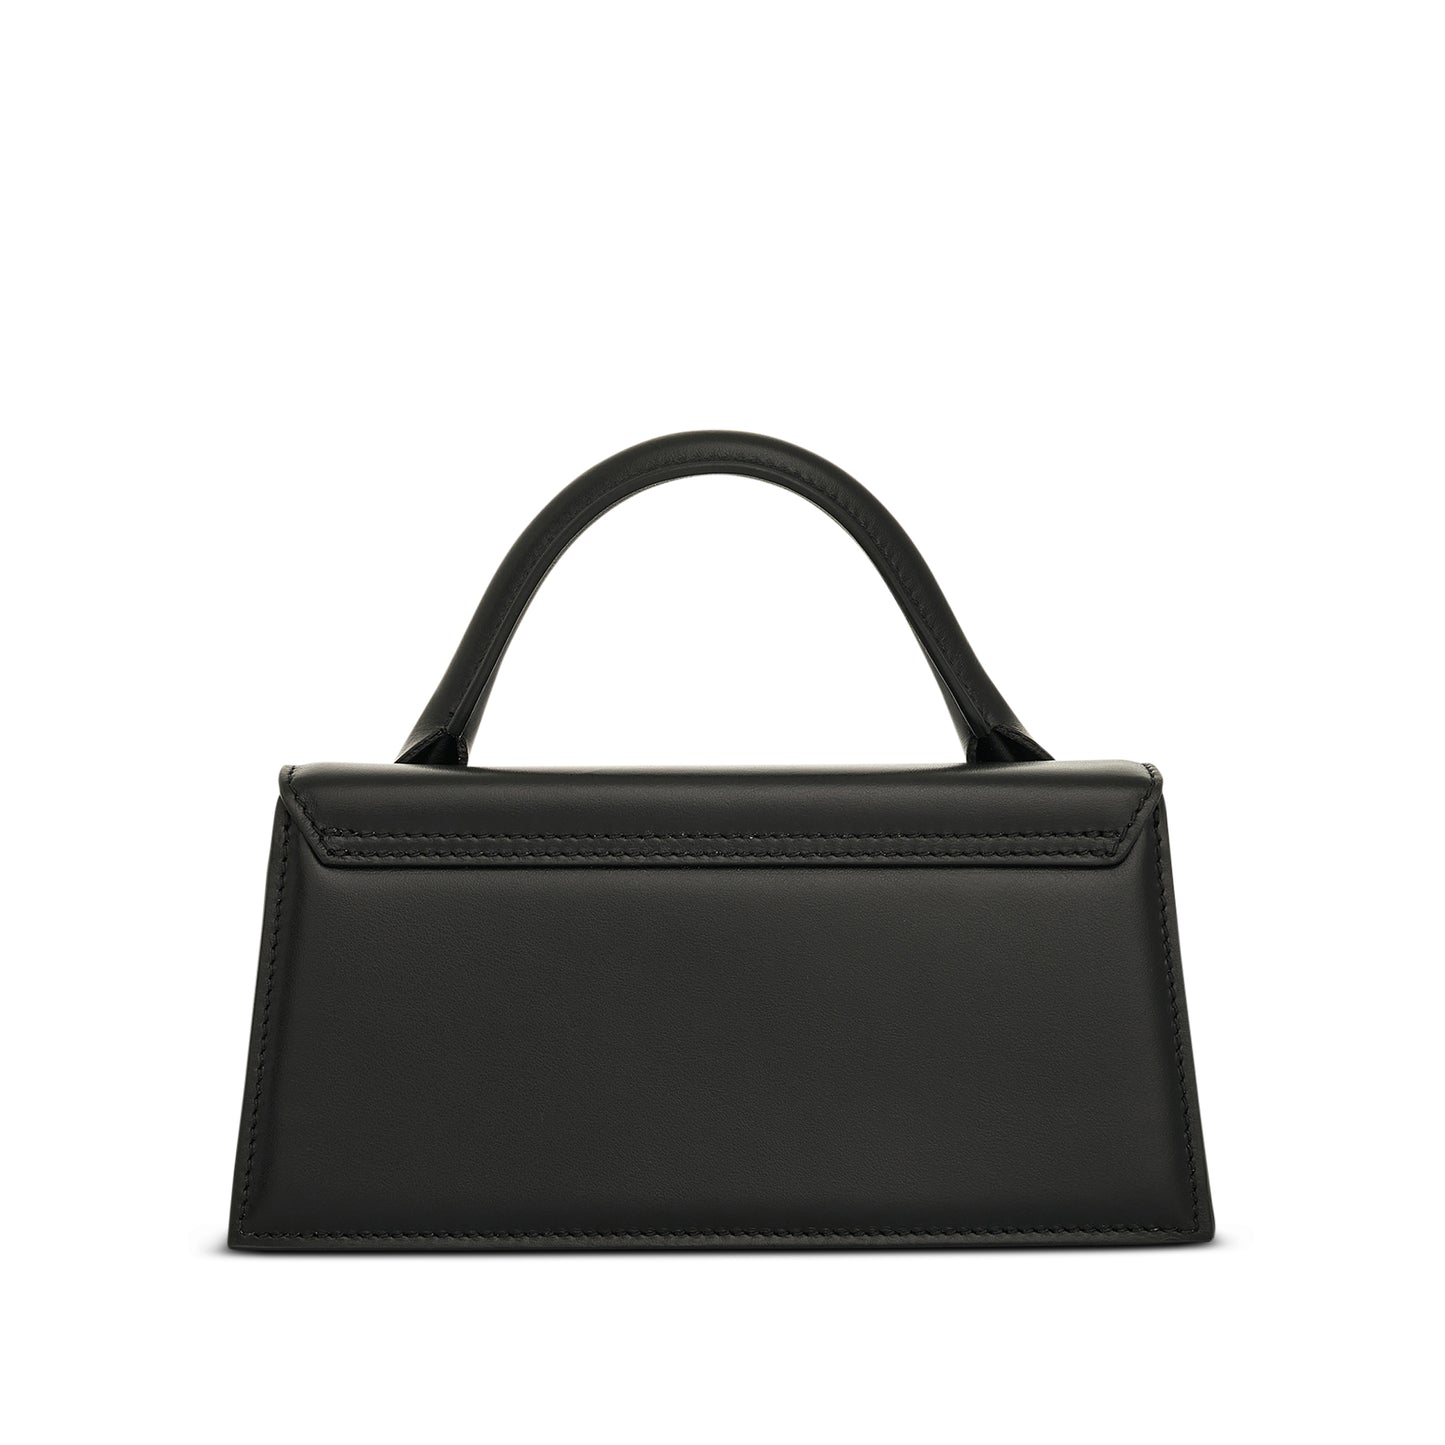 Le Chiquito Long Leather Bag in Black